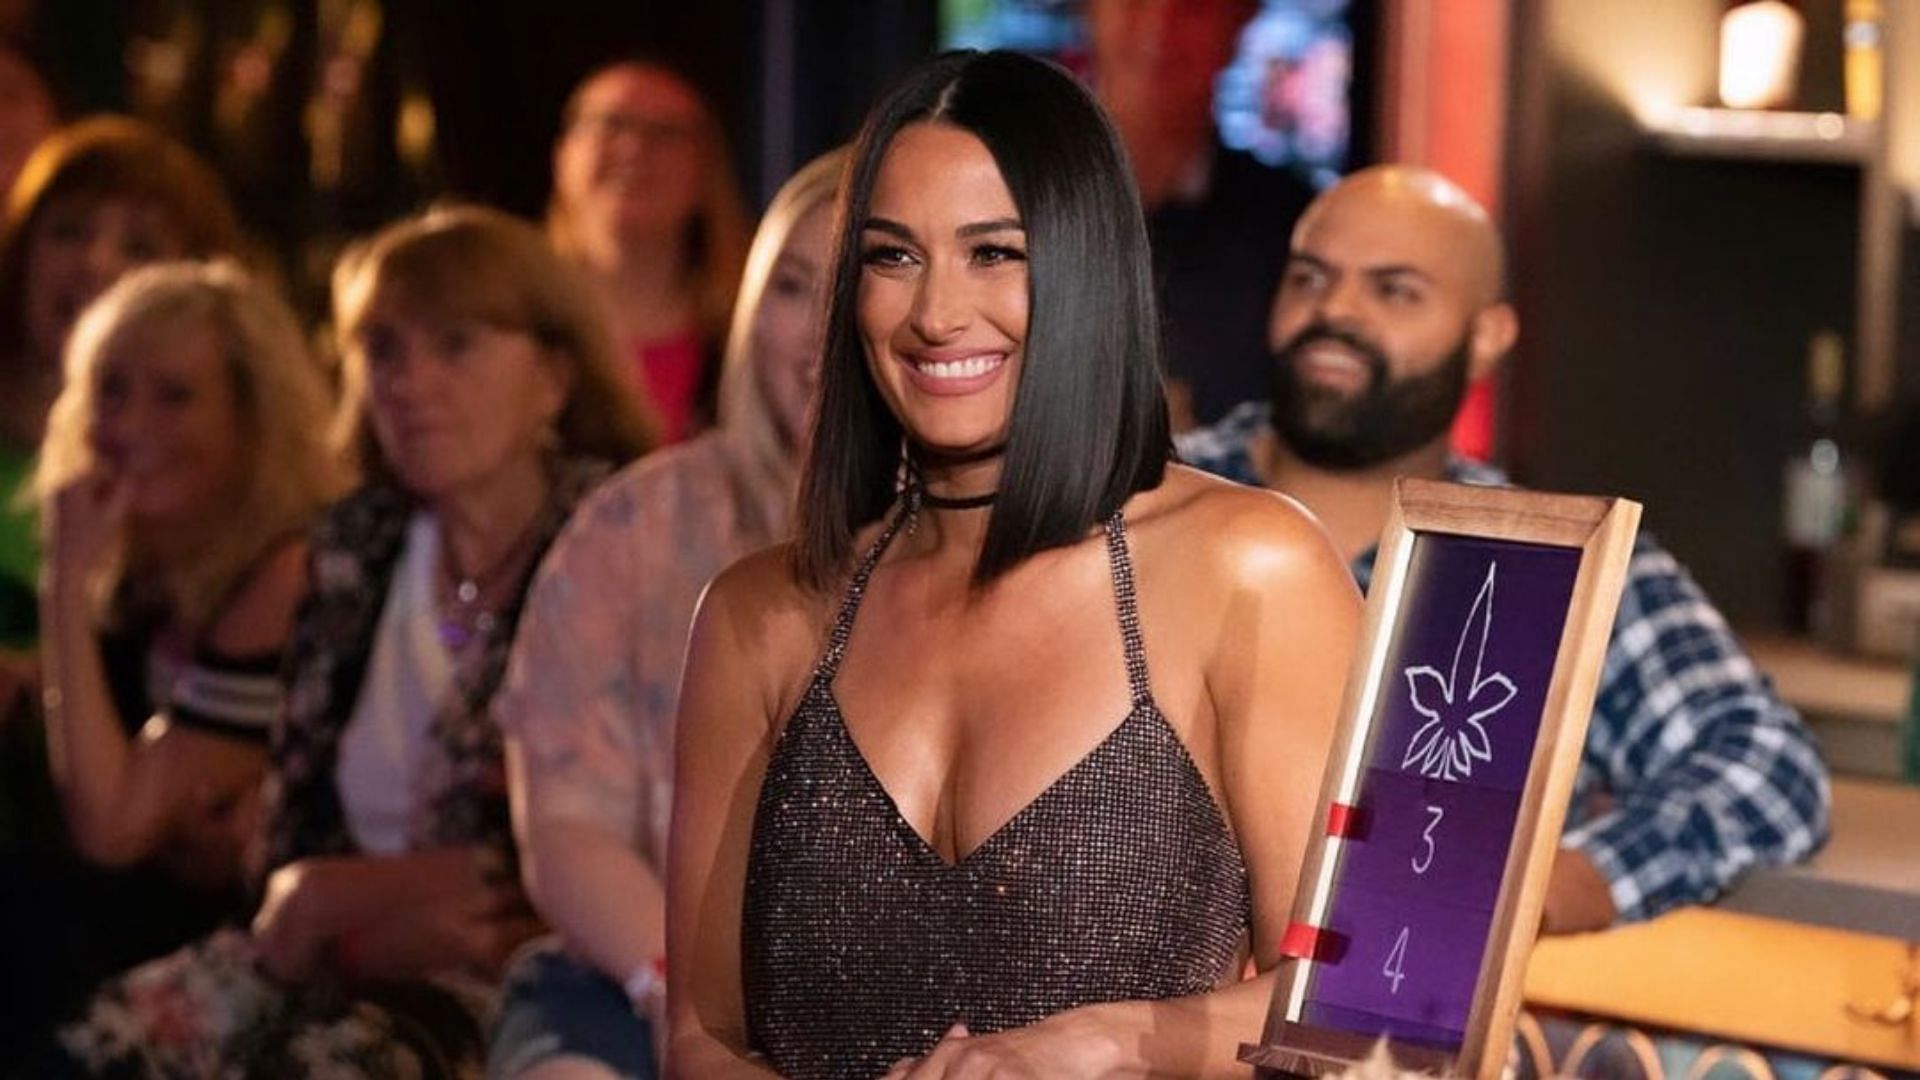 You were made for this show”: Barmageddon fans rave about host Nikki Bella  in episode 2